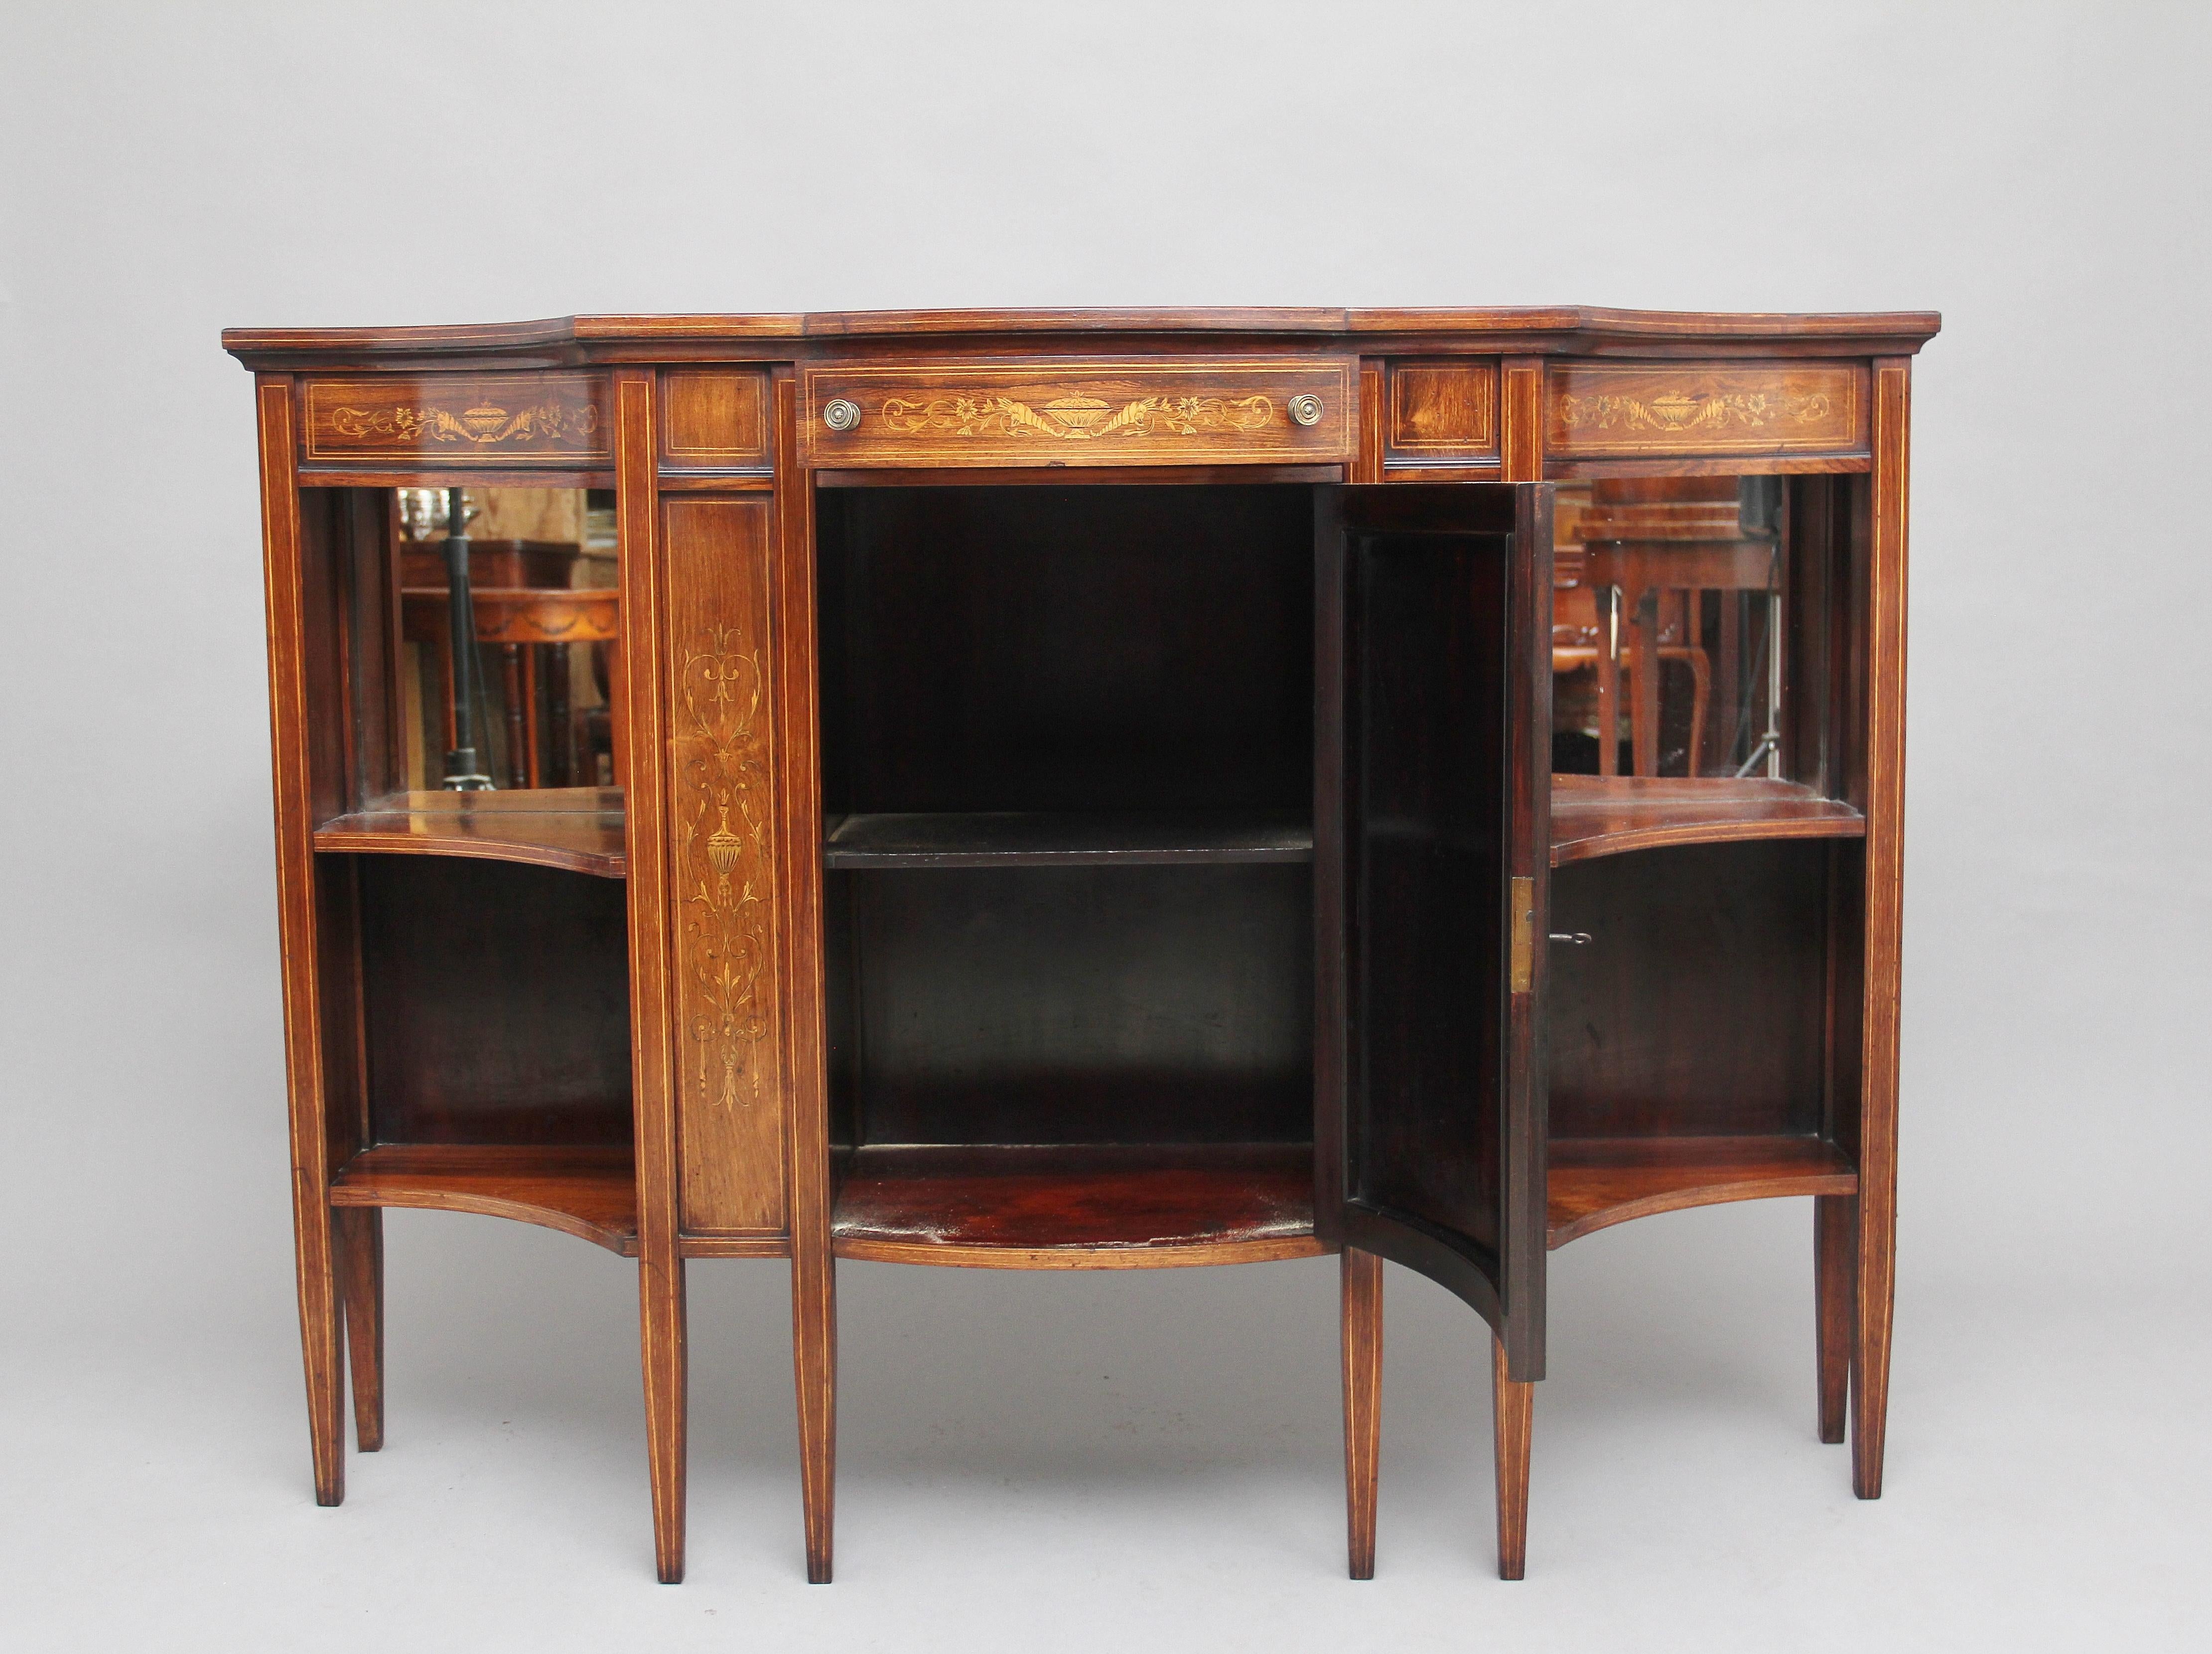 19th century inlaid rosewood cabinet of serpentine form, the shaped and wonderfully figured top above an inlaid frieze consisting of floral and urn decoration, a frieze drawer at the centre, mahogany lined with original brass turned knobs, below